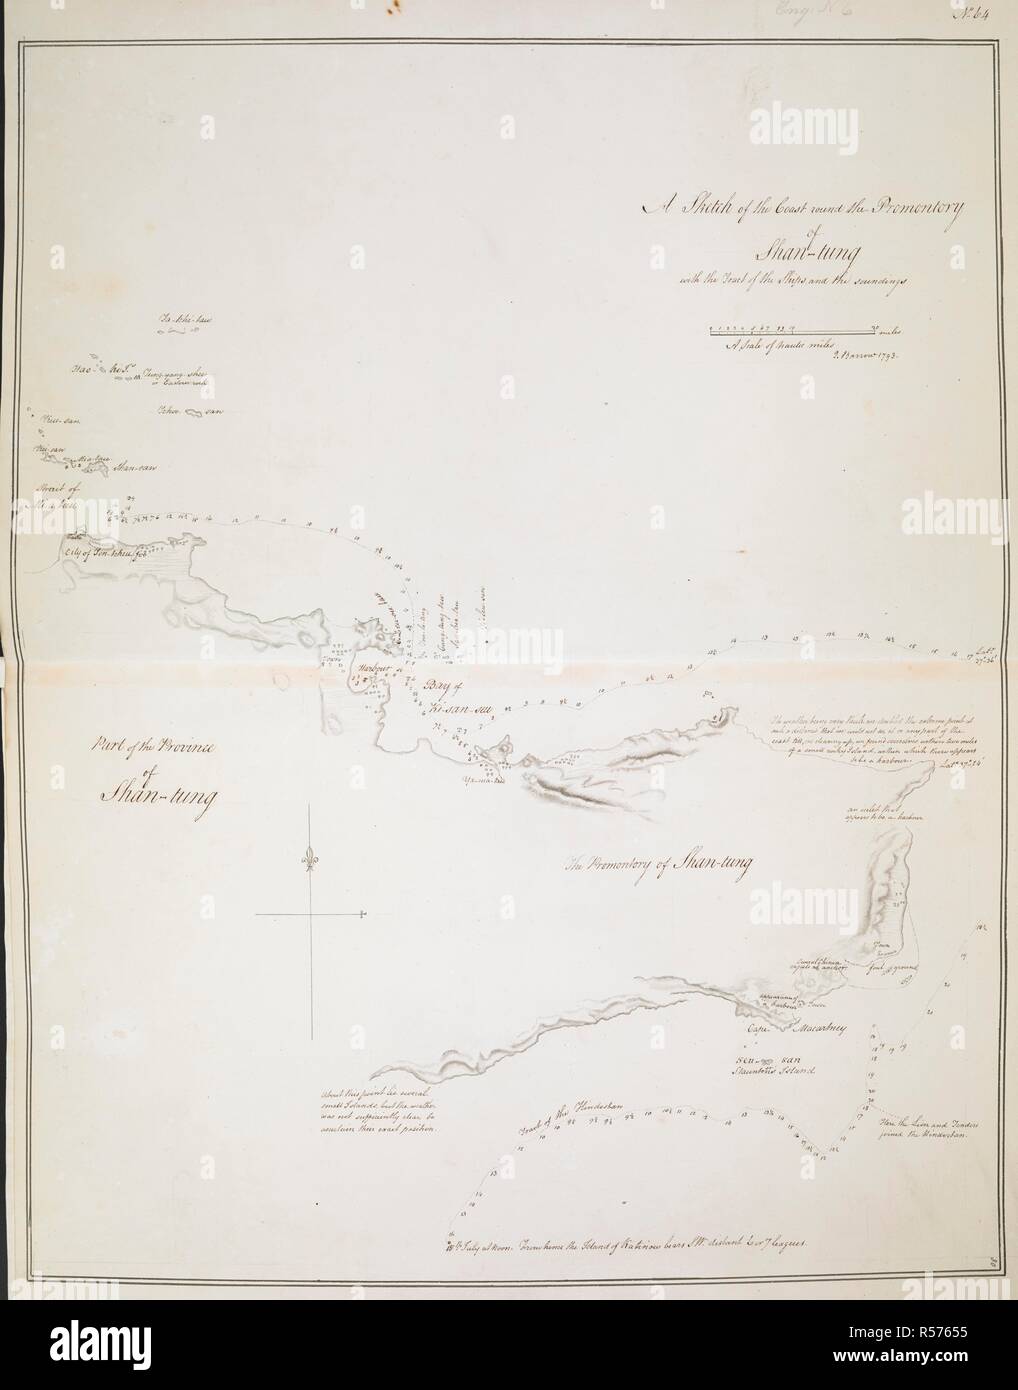 A 'sketch of the coast round the Promontory of Shan-tung,' from Cape Macartney to Teu-tcheou-foo head, taken by compass in sailing round it; with the track of the Lion and Hindostan, and the soundings; drawn by J. Barrow in 1793. . A collection of eighty views, maps, portraits and drawings illustrative of the Embassy sent to China under George, Earl of Macartney, in 1793; drawn chiefly by William Alexander, some by Sir John Barrow, Bart., some by Sir Henry Woodbine Parish, and one by William Gomm. Many of them are engraved in Sir George Staunton's Narrative of the Embassy, published in 1797. E Stock Photo